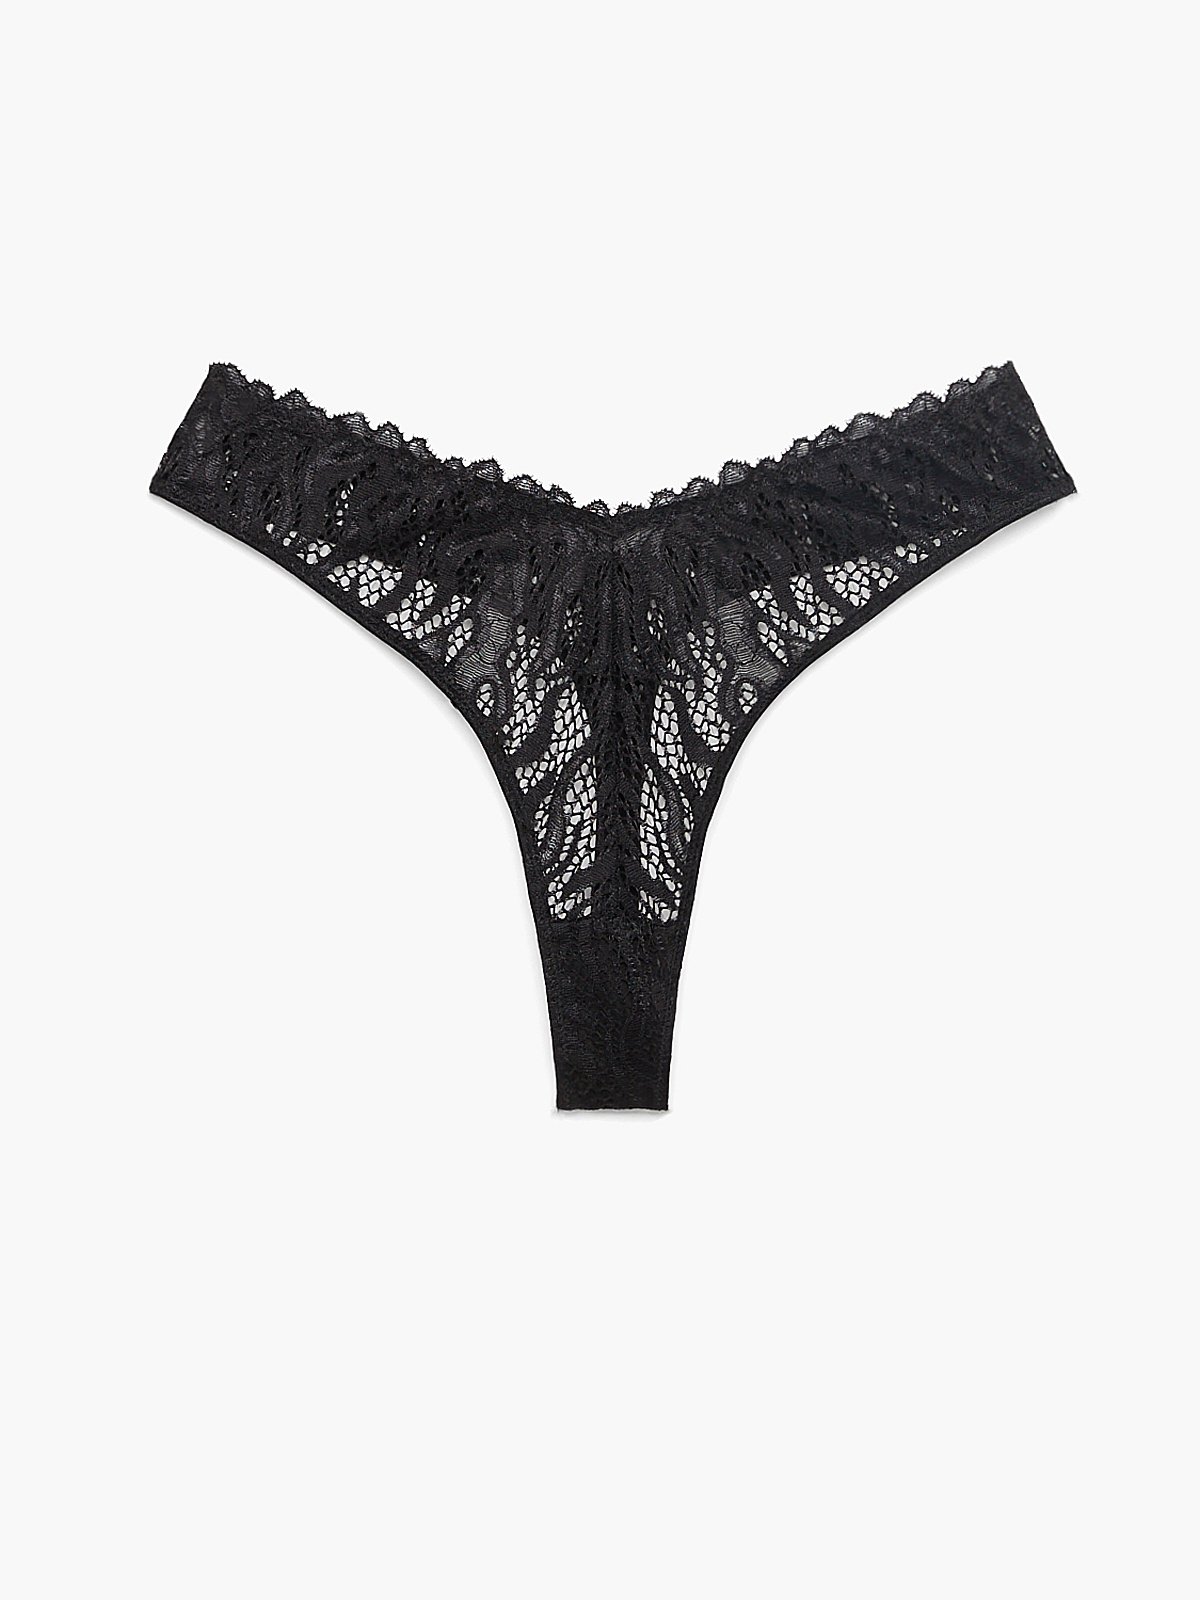 https://cdn.savagex.com/media/images/products/UD2354303-0687/FAST-LANE-LACE-THONG-PANTY-UD2354303-0687-LAYDOWN-1200x1600.jpg